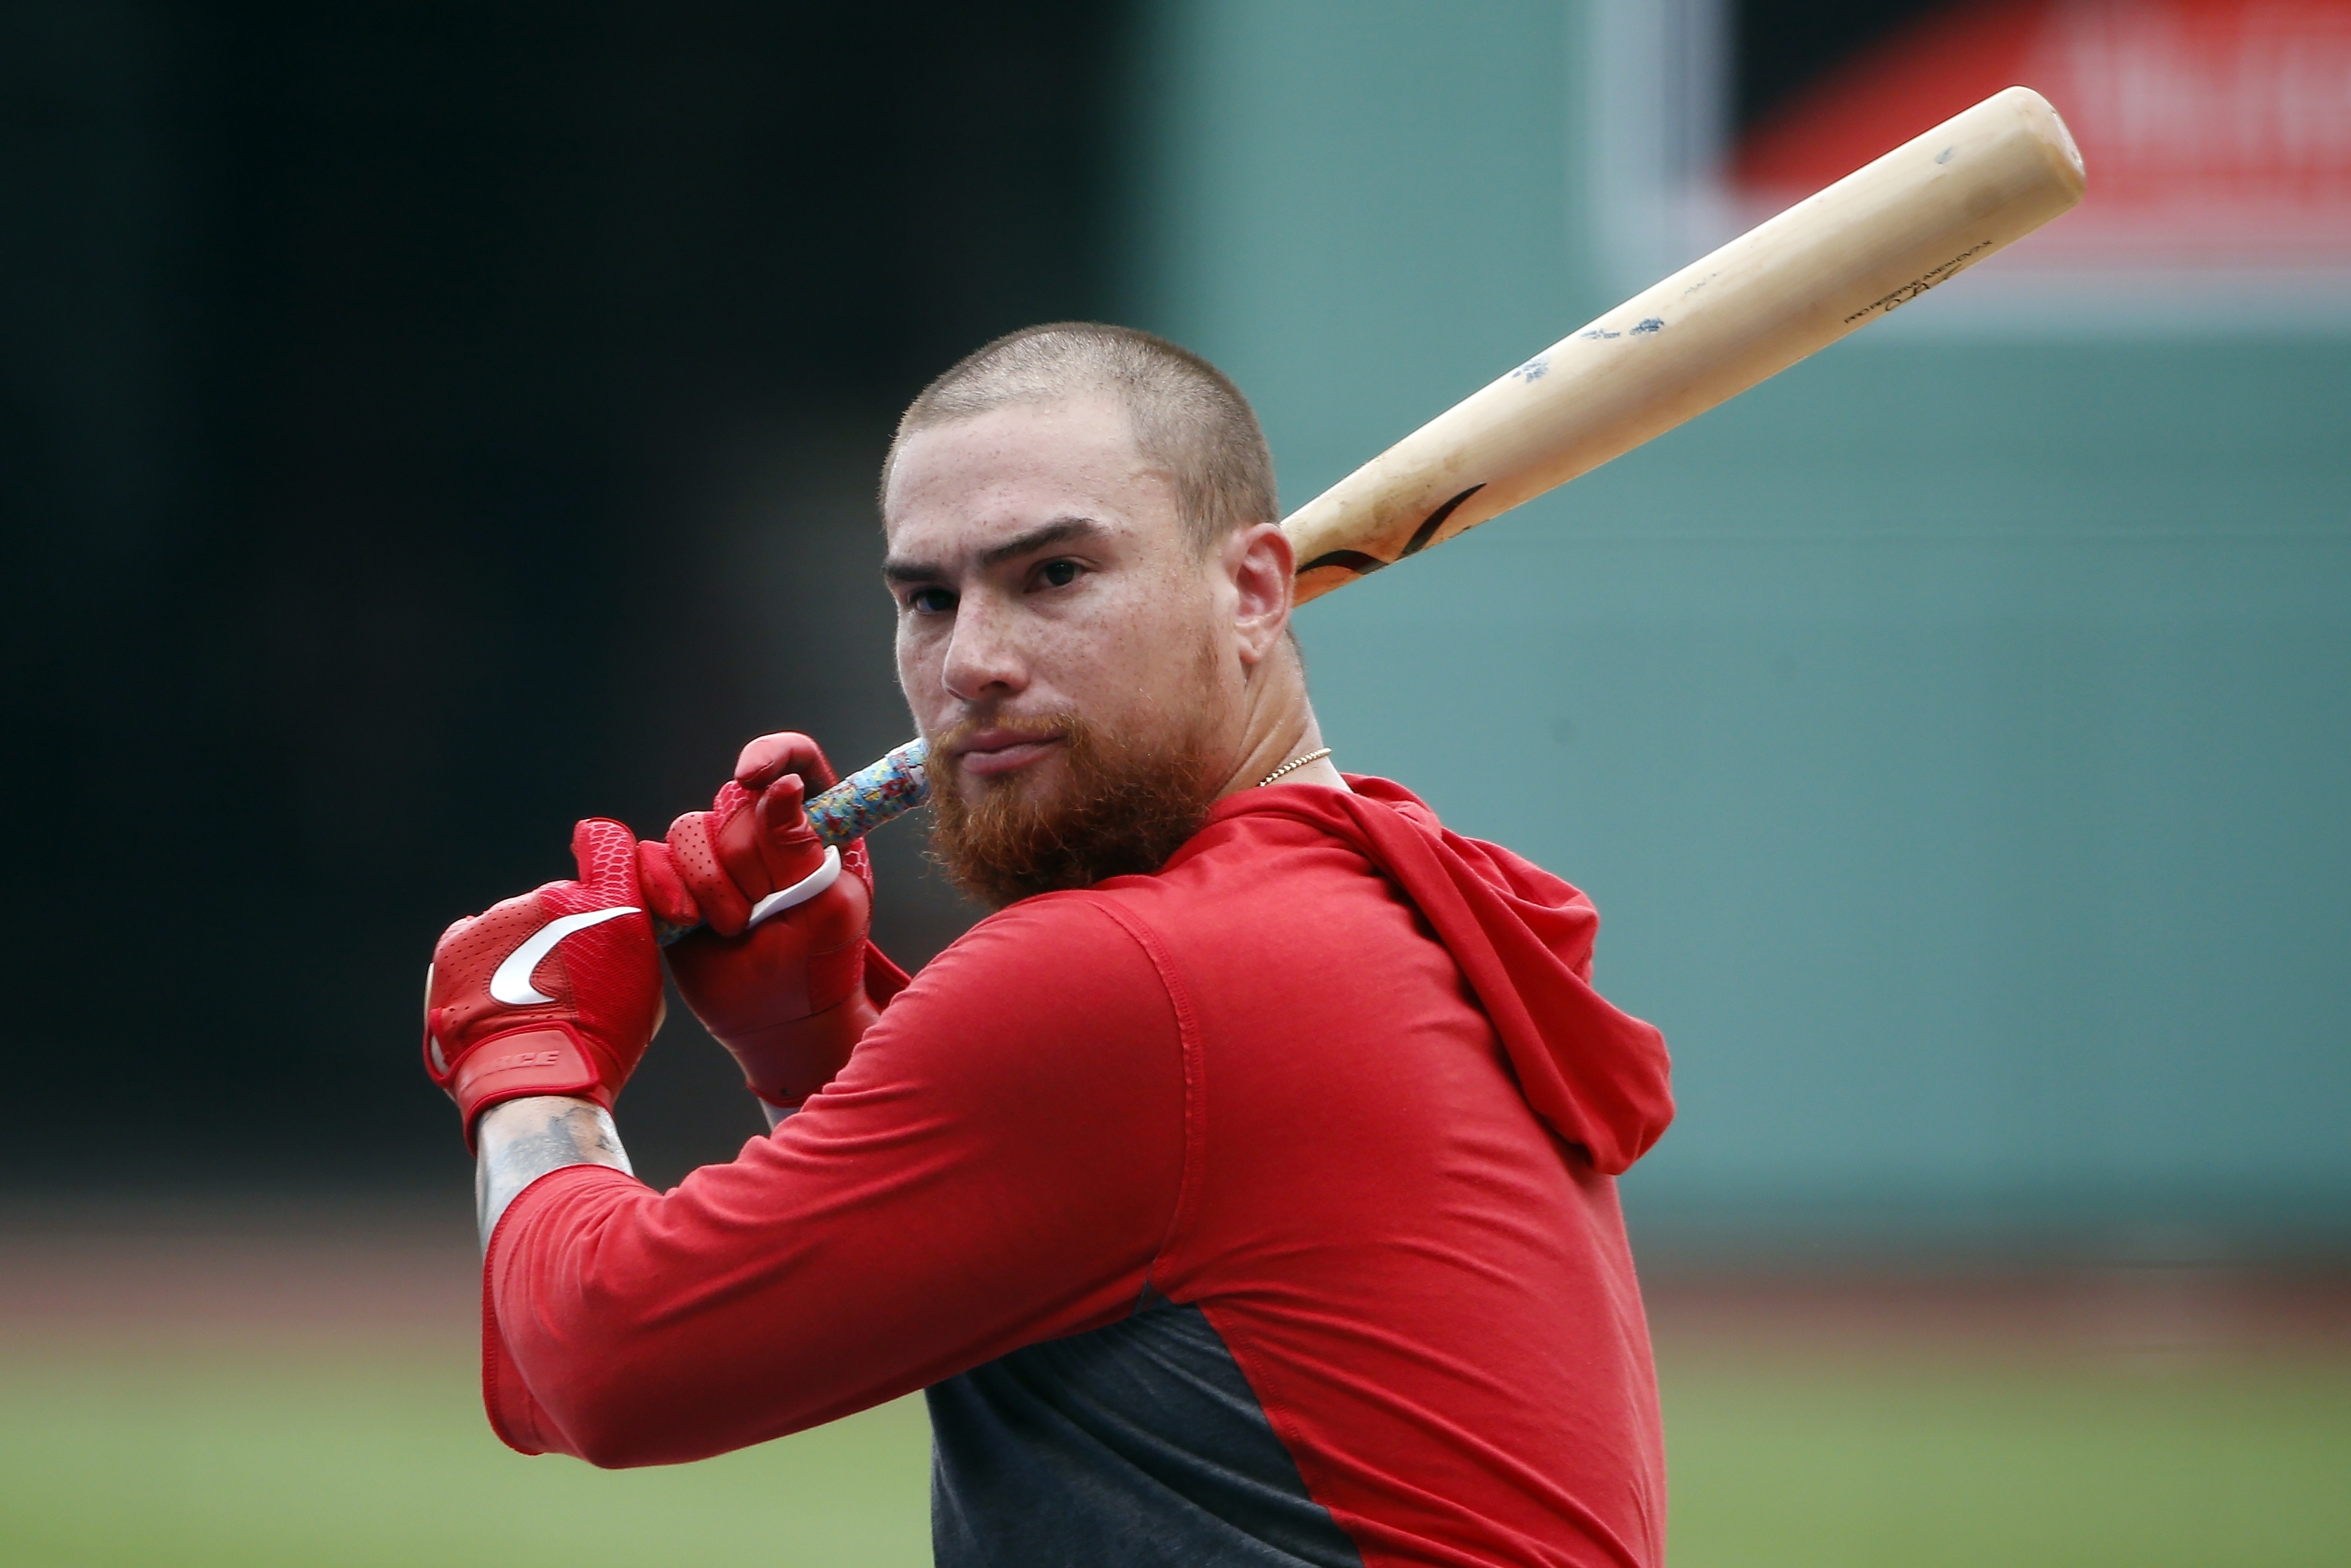 Boston Red Sox 2021 Season Preview: Can Christian Vázquez solidify his spot  among the game's best catchers? - Over the Monster